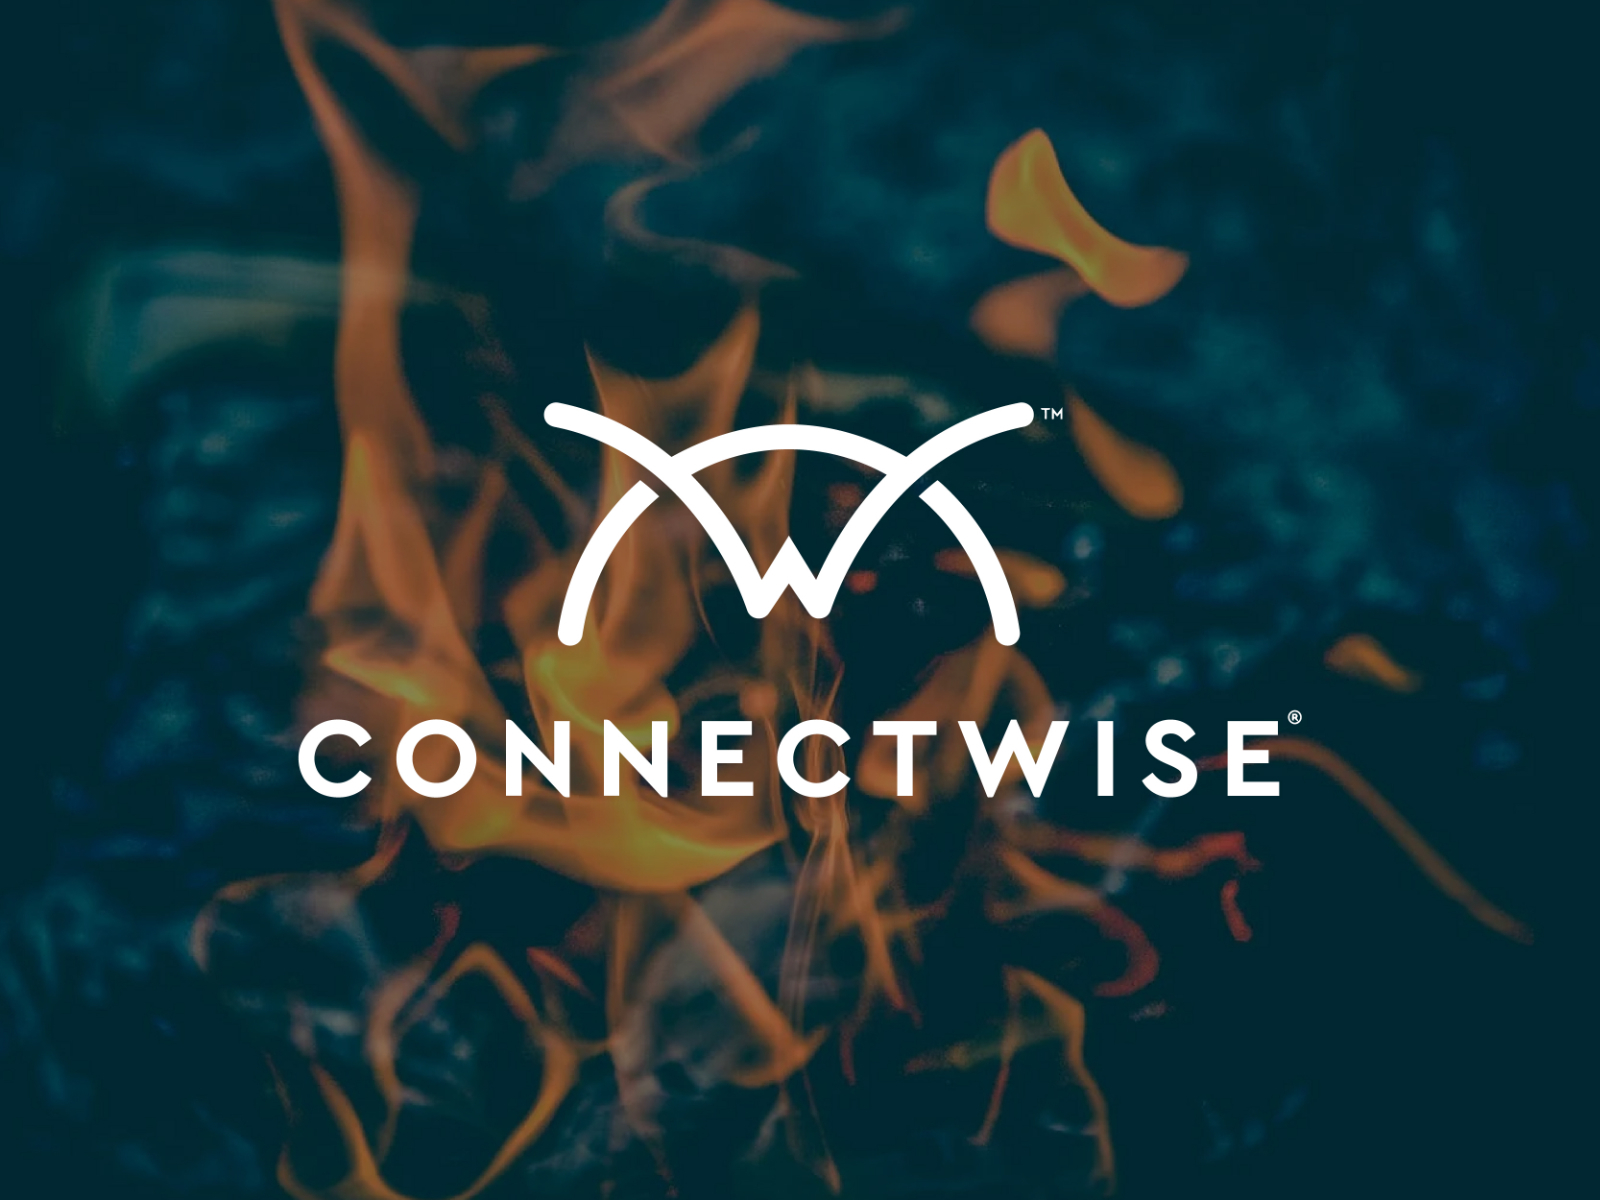 Security experts caution that hackers are taking advantage of vulnerabilities in ConnectWise to deploy LockBit ransomware